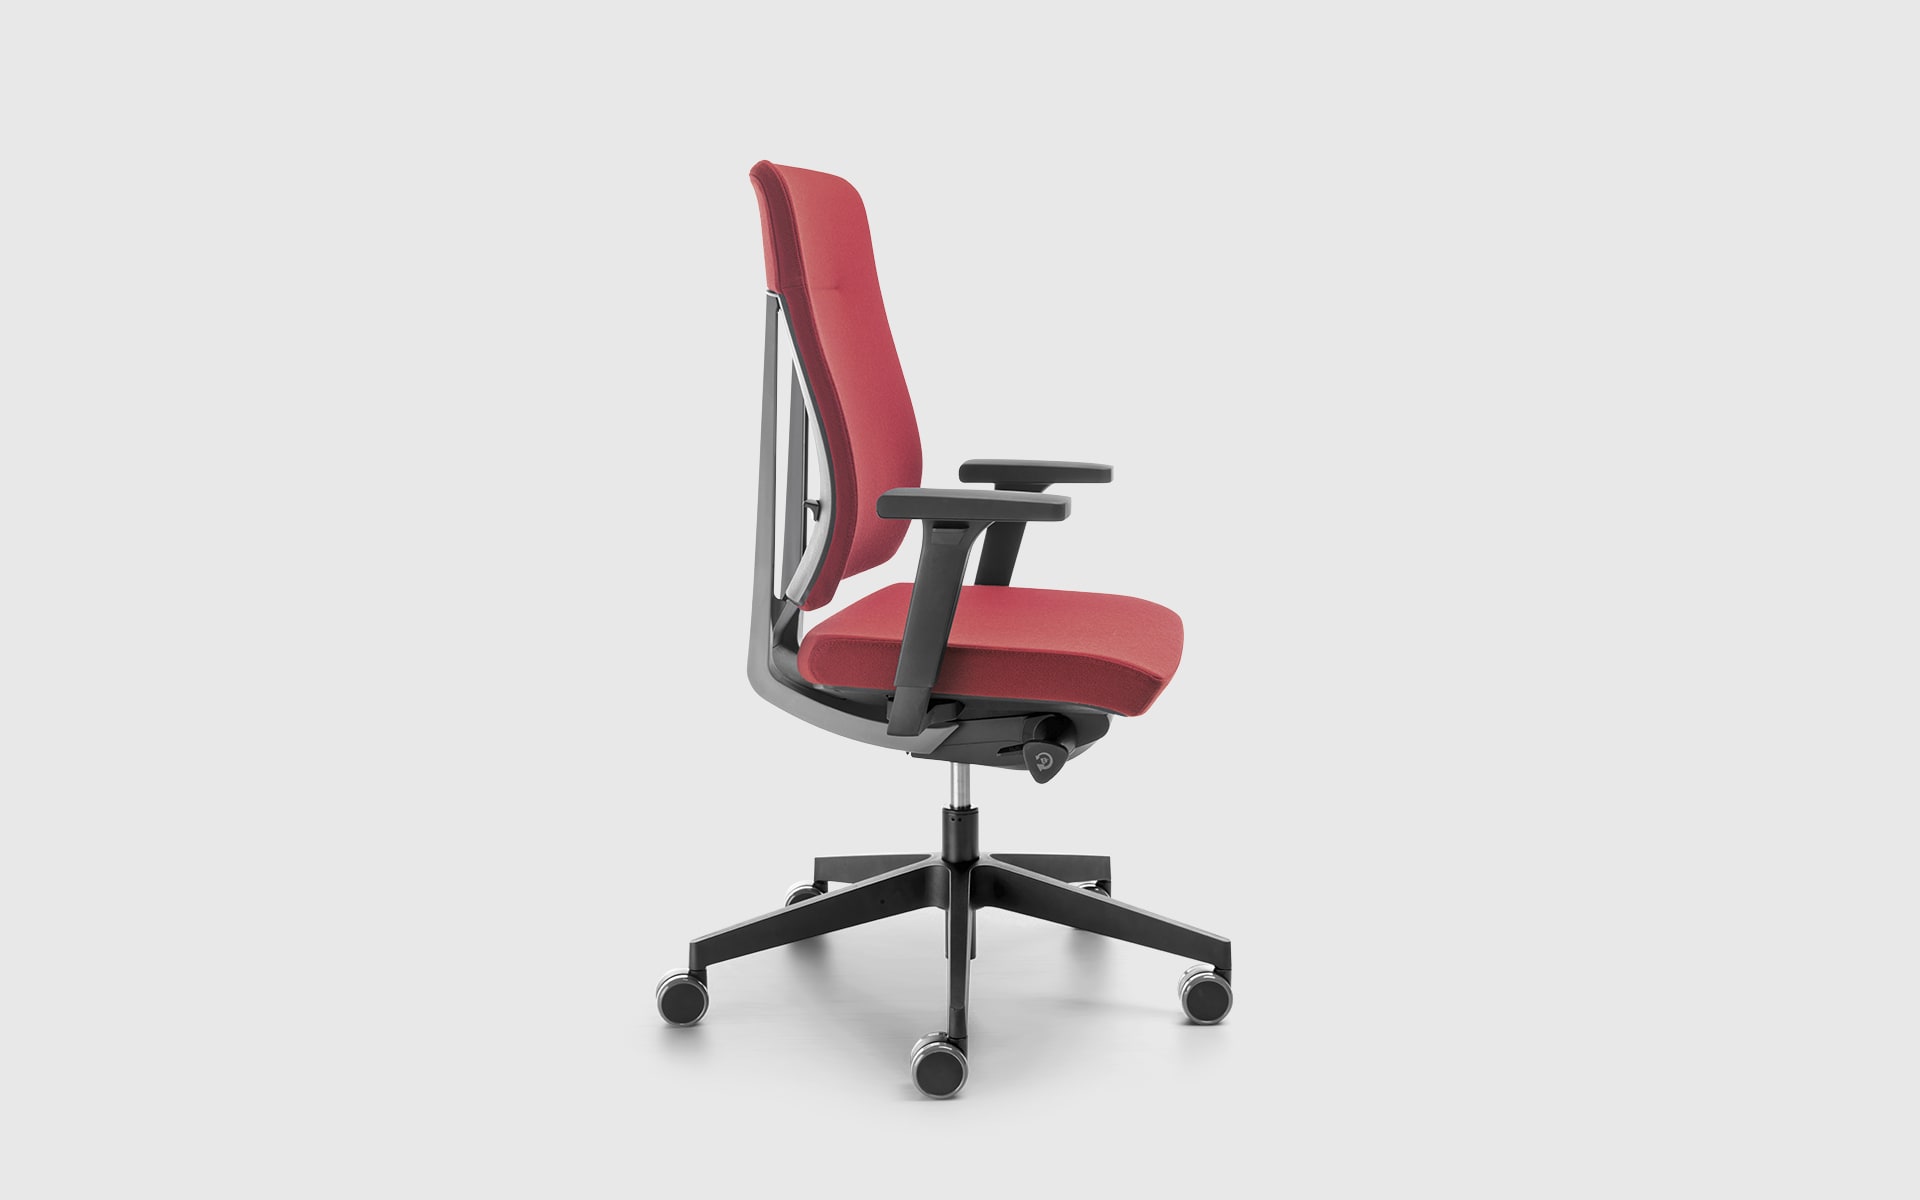 Profim Xenon office chair by ITO Design with red upholstery